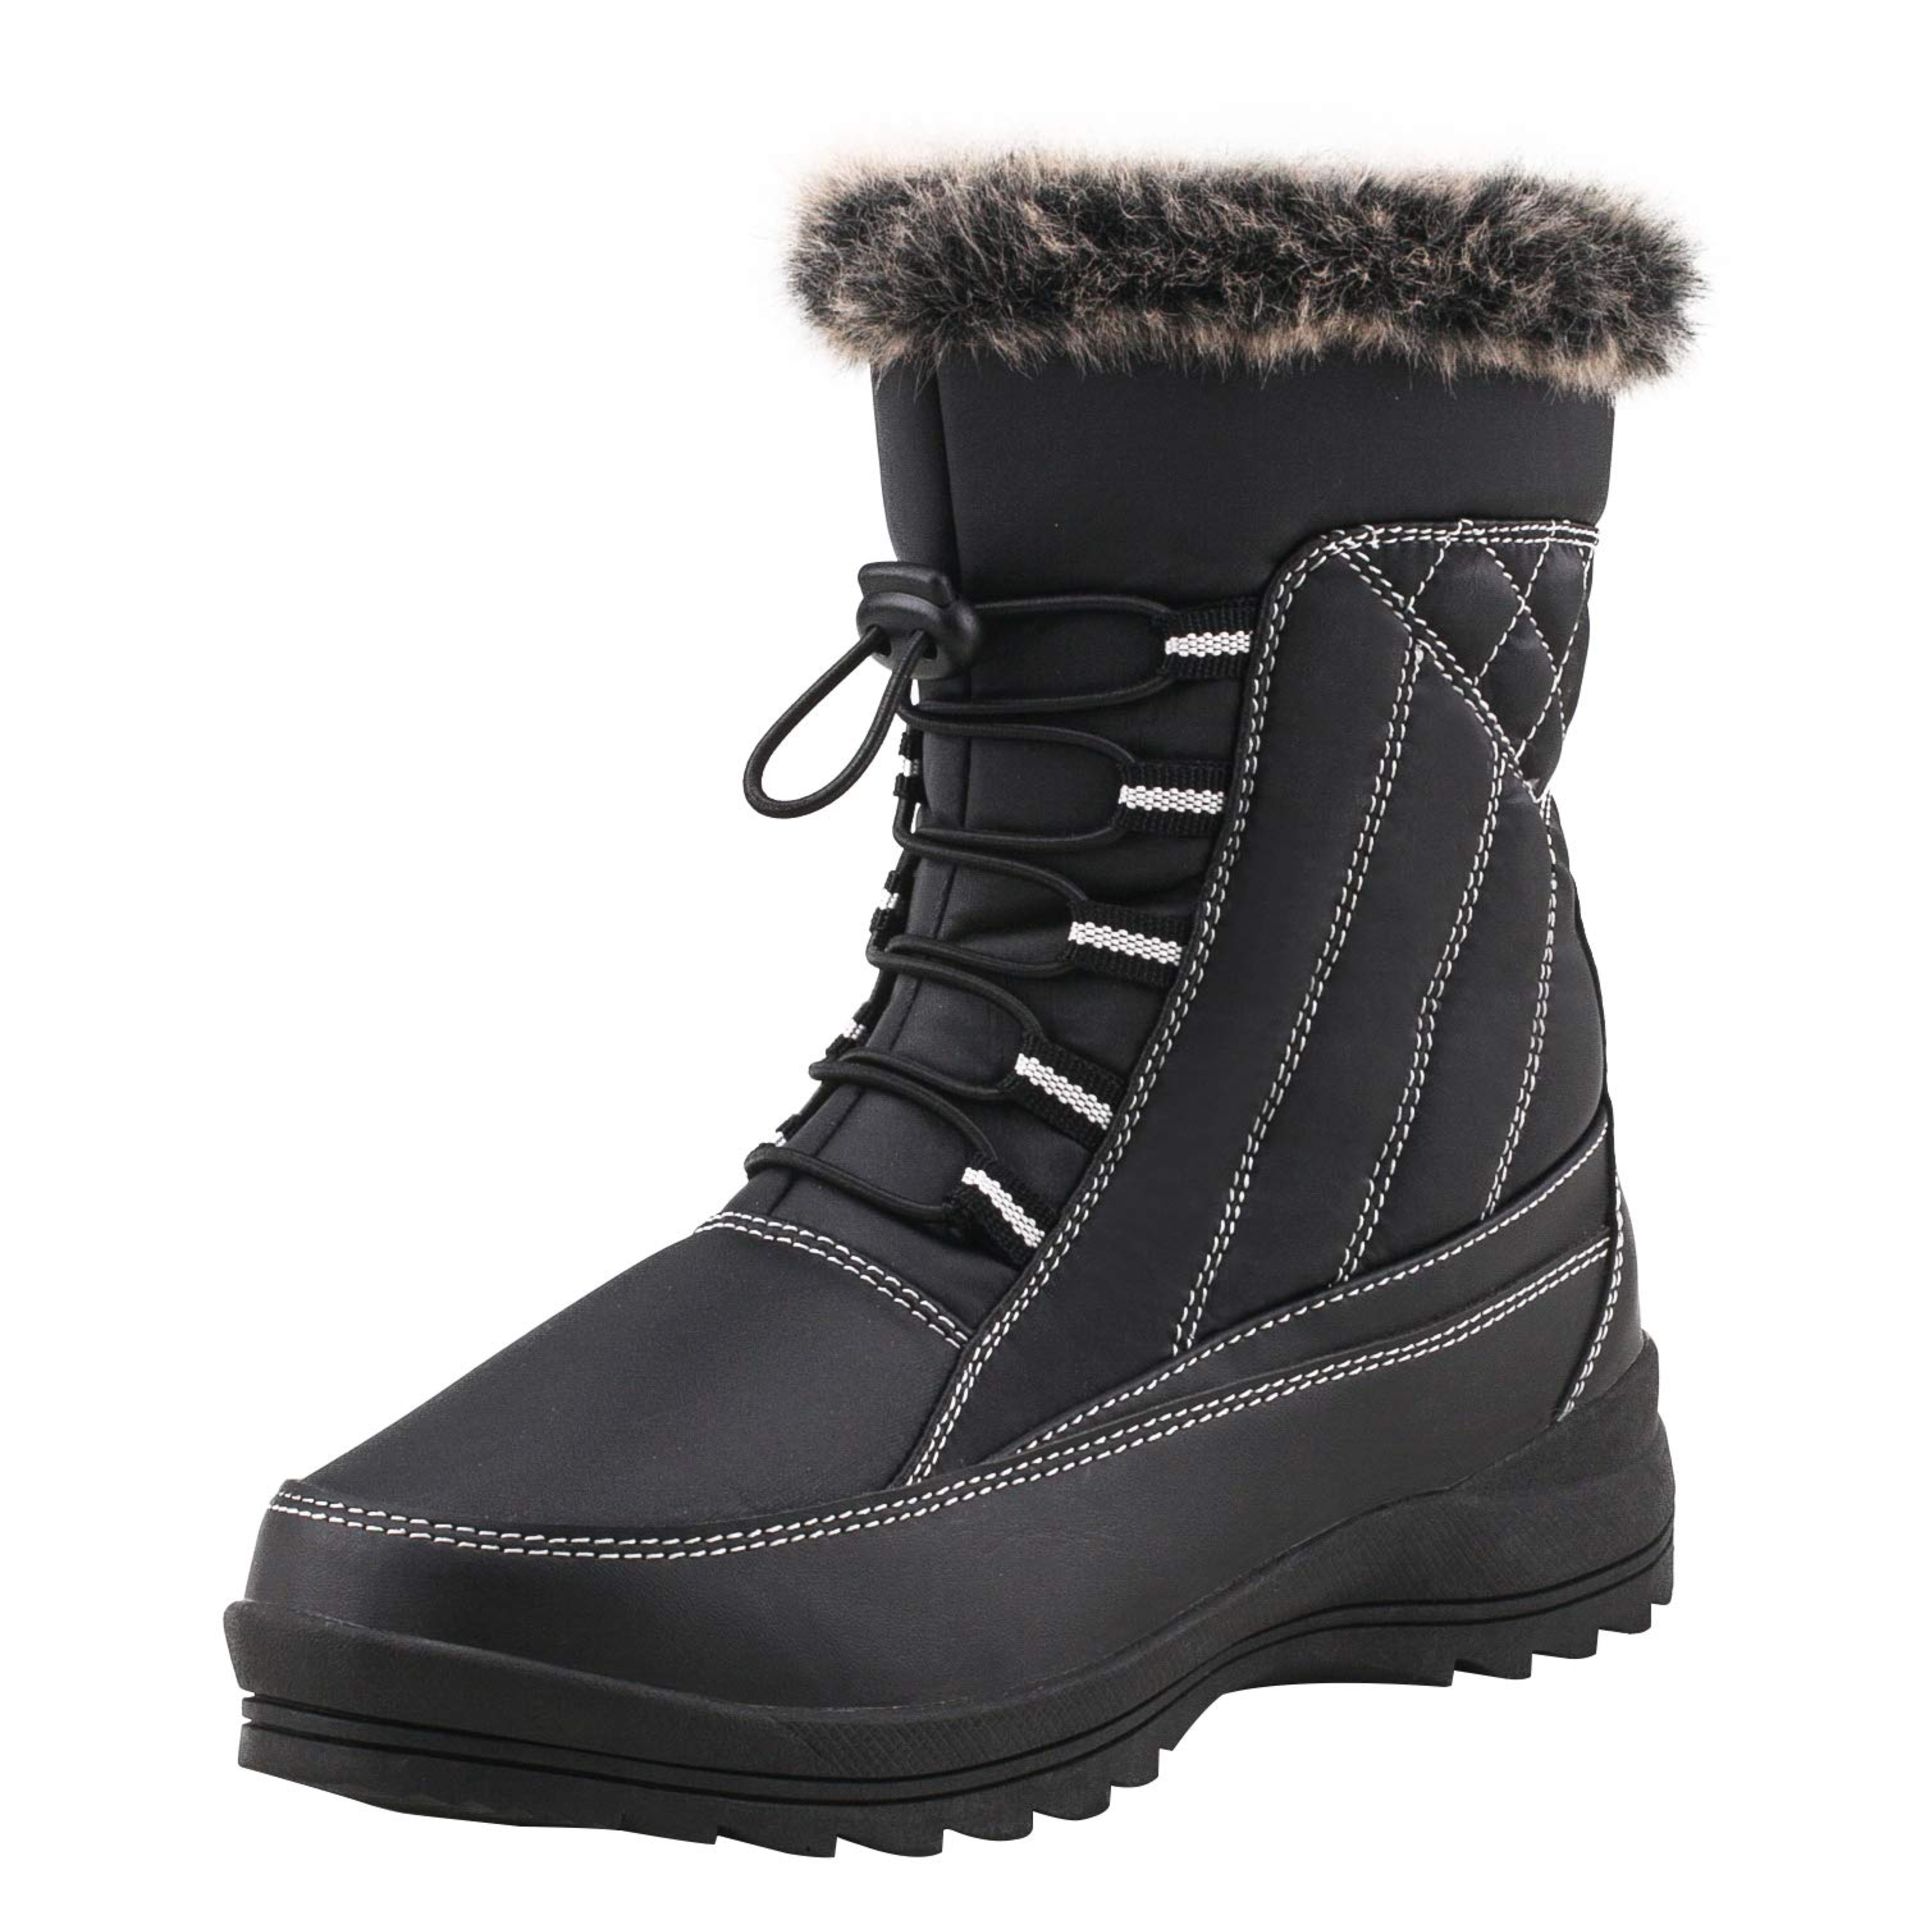 RRP £38.43 Shenji Women's Winter Mid-calf Boots Fur-lined Lace-up H7631 Black 6.5UK 40